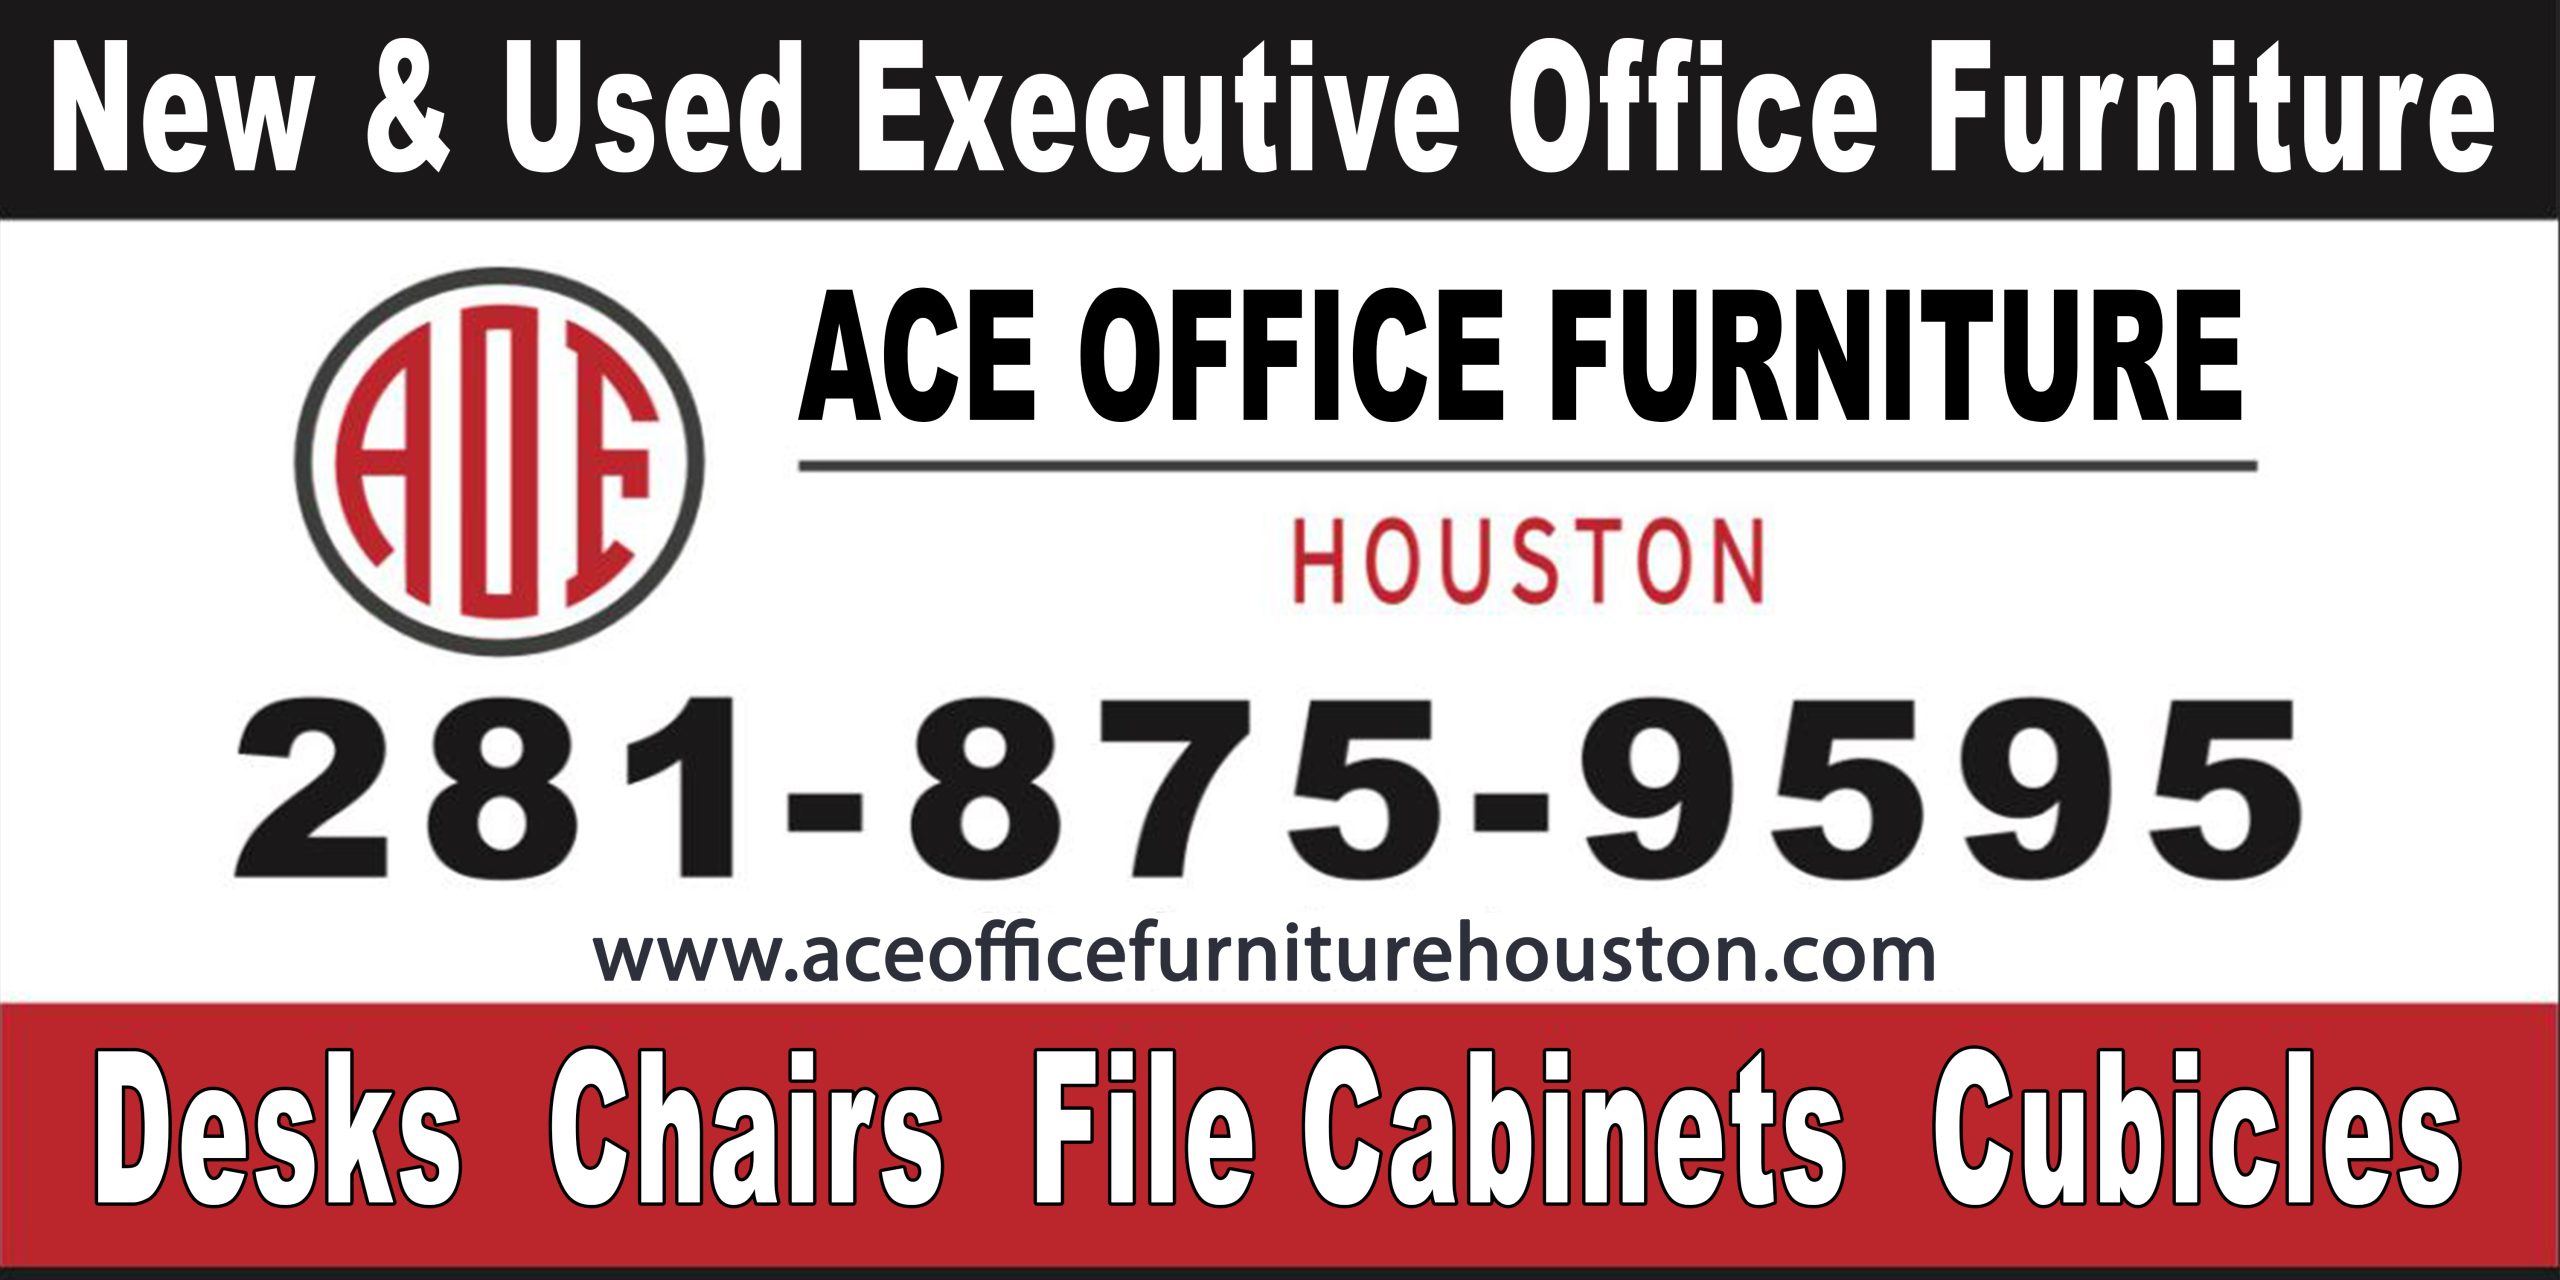 Renowned Office Furniture Experts